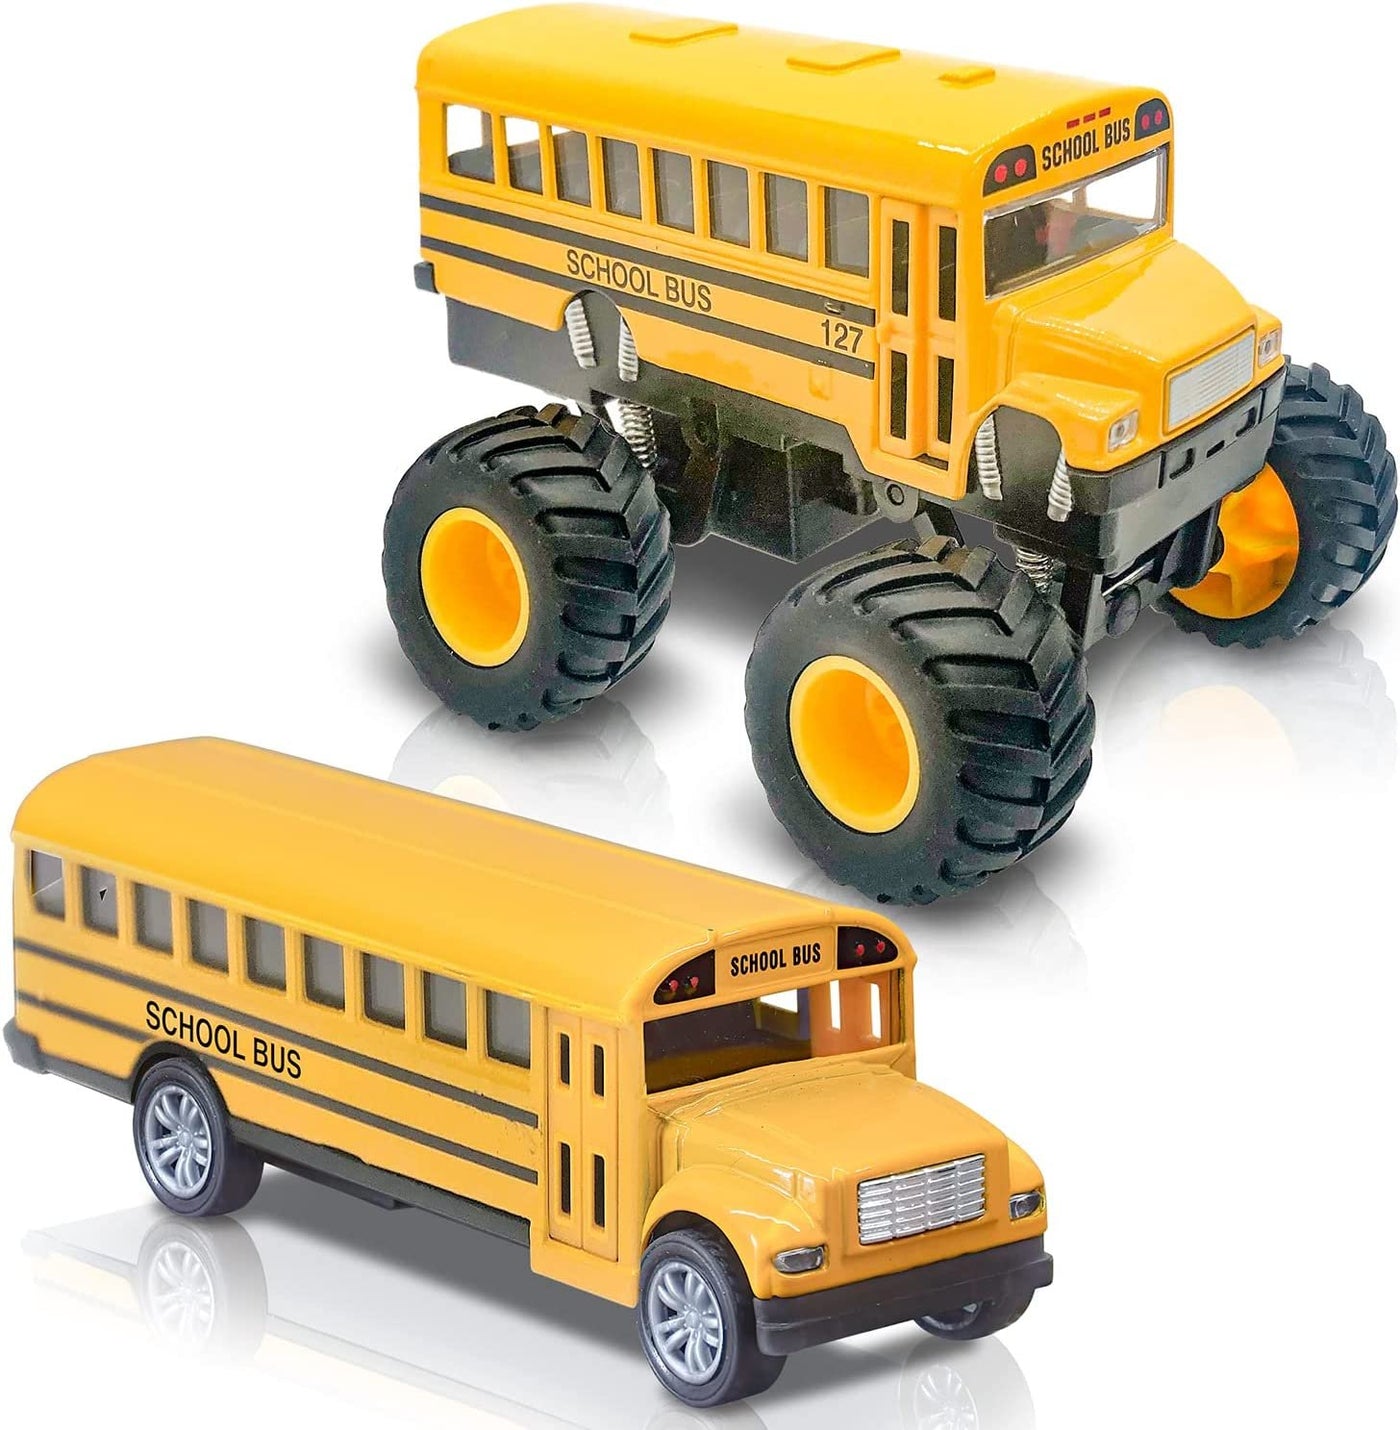 ArtCreativity 5 Inch Pull Back School Bus Toy Set - Set of 2 - Includes 5 Inch Monster-Wheel Bus and 5 inch Classic Schoolbus, Diecast Bus Playset with Pull Back Mechanism, Great Gift Idea for Kids